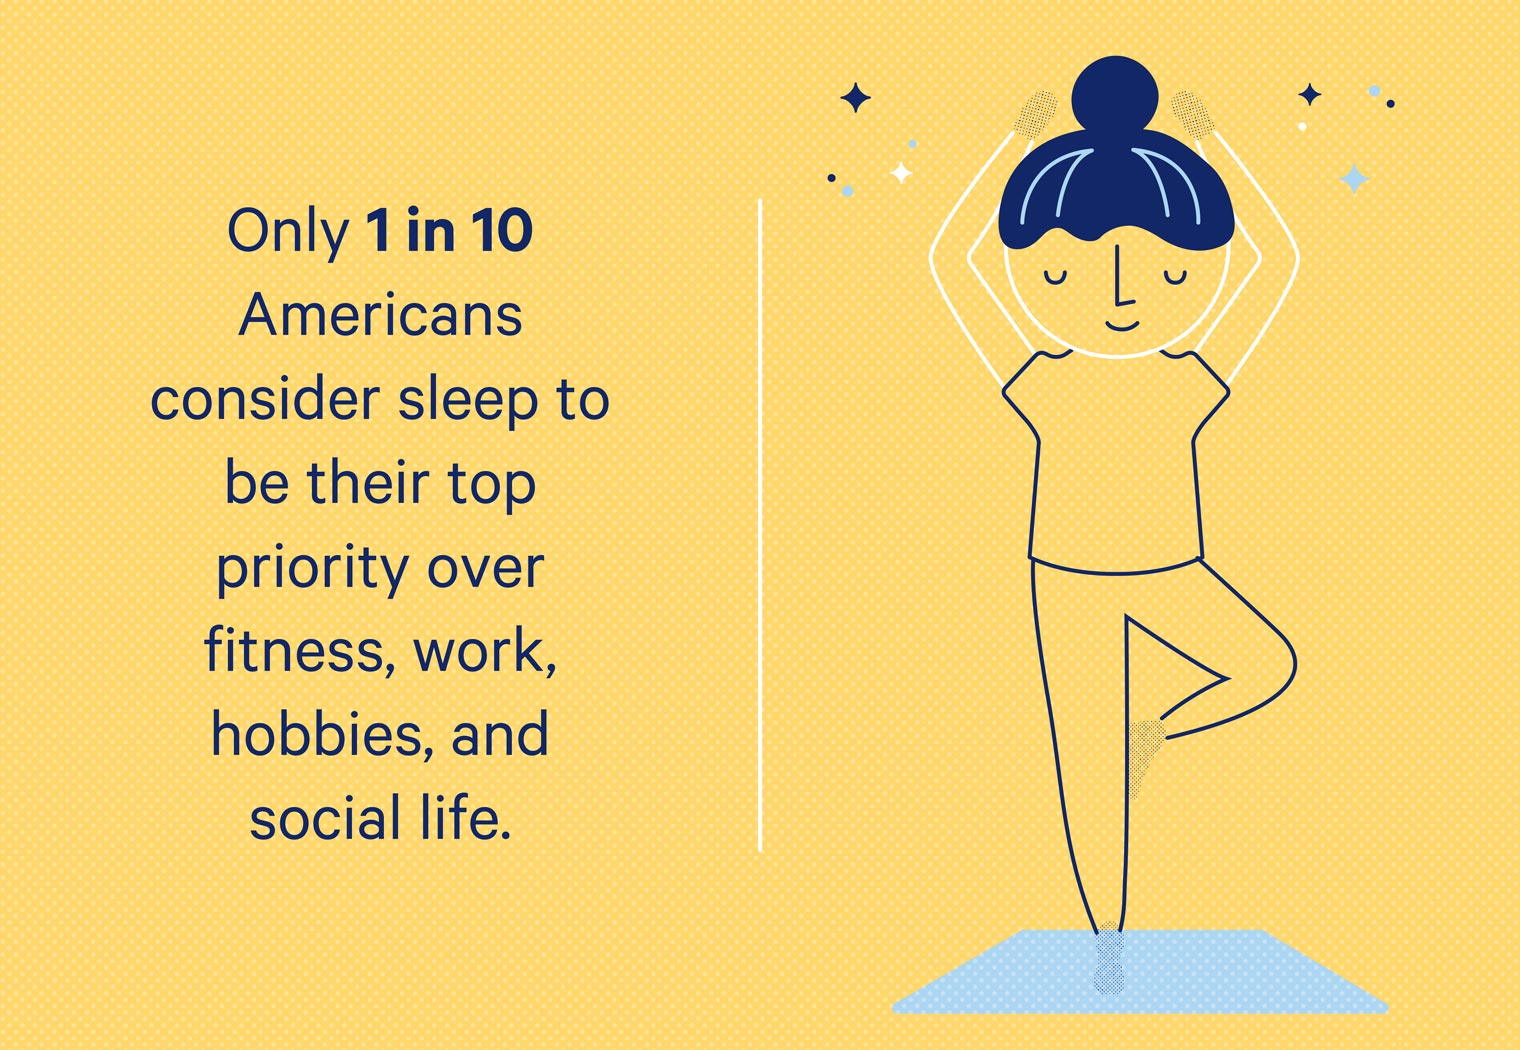 Only 1 in 10 Americans prioritize sleep over their work, fitness, hobbies, and social life.